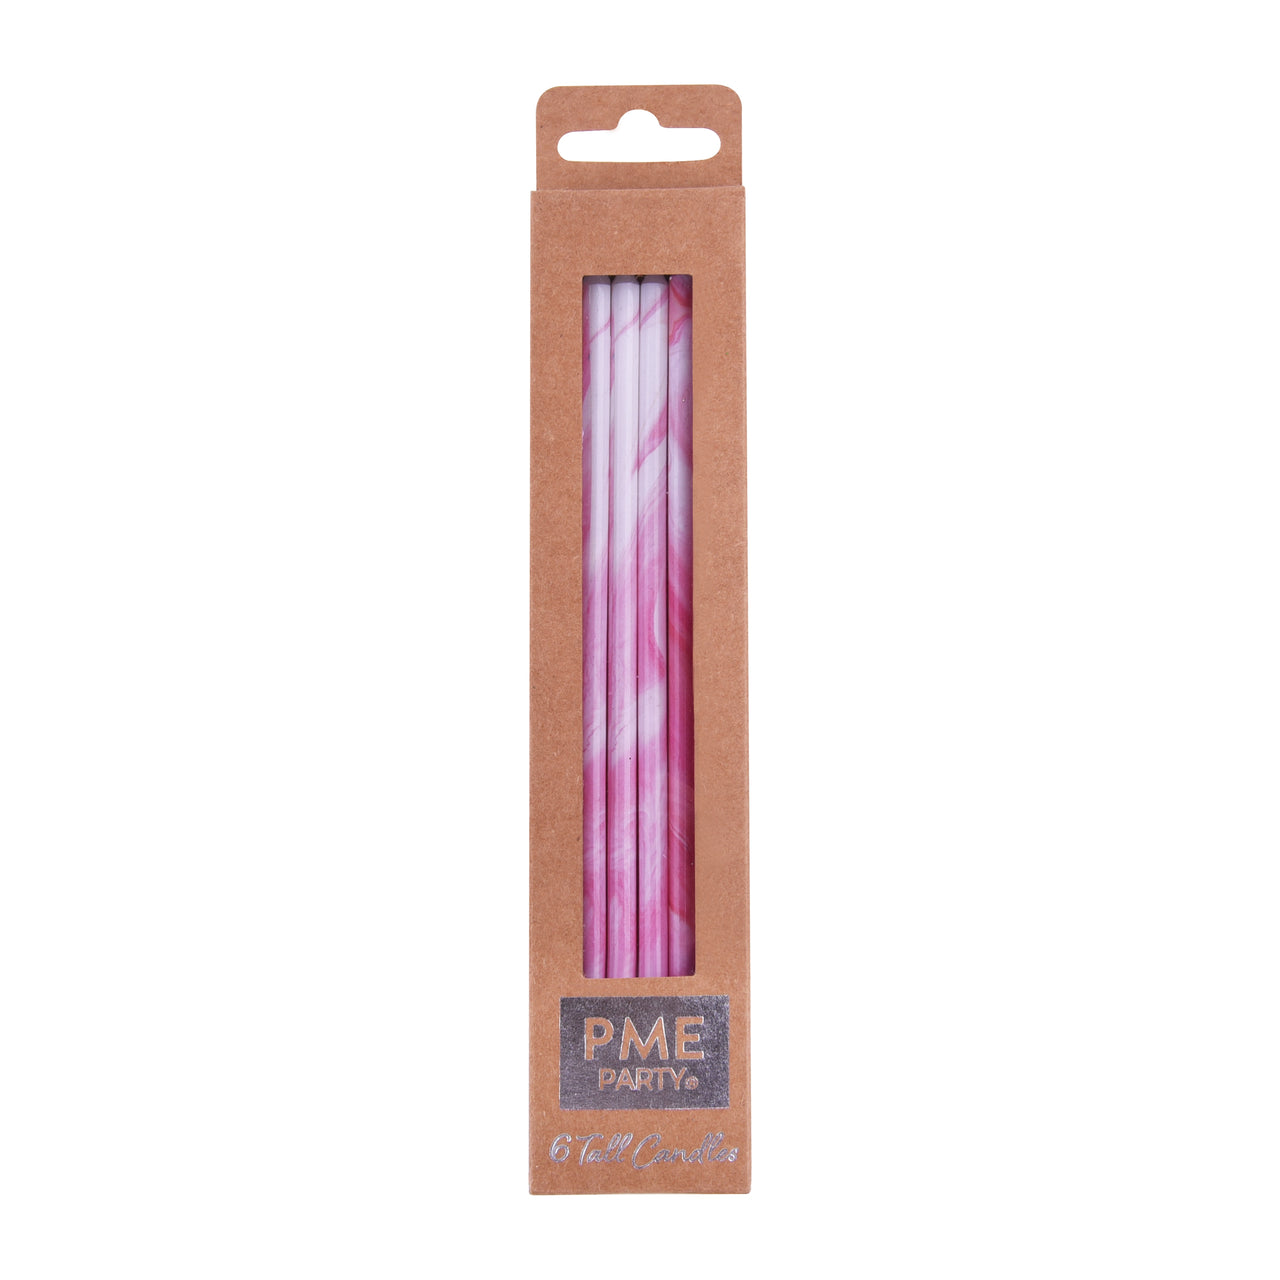 Vela Extra Alta Pink Marble PME - Pack 6 unidades